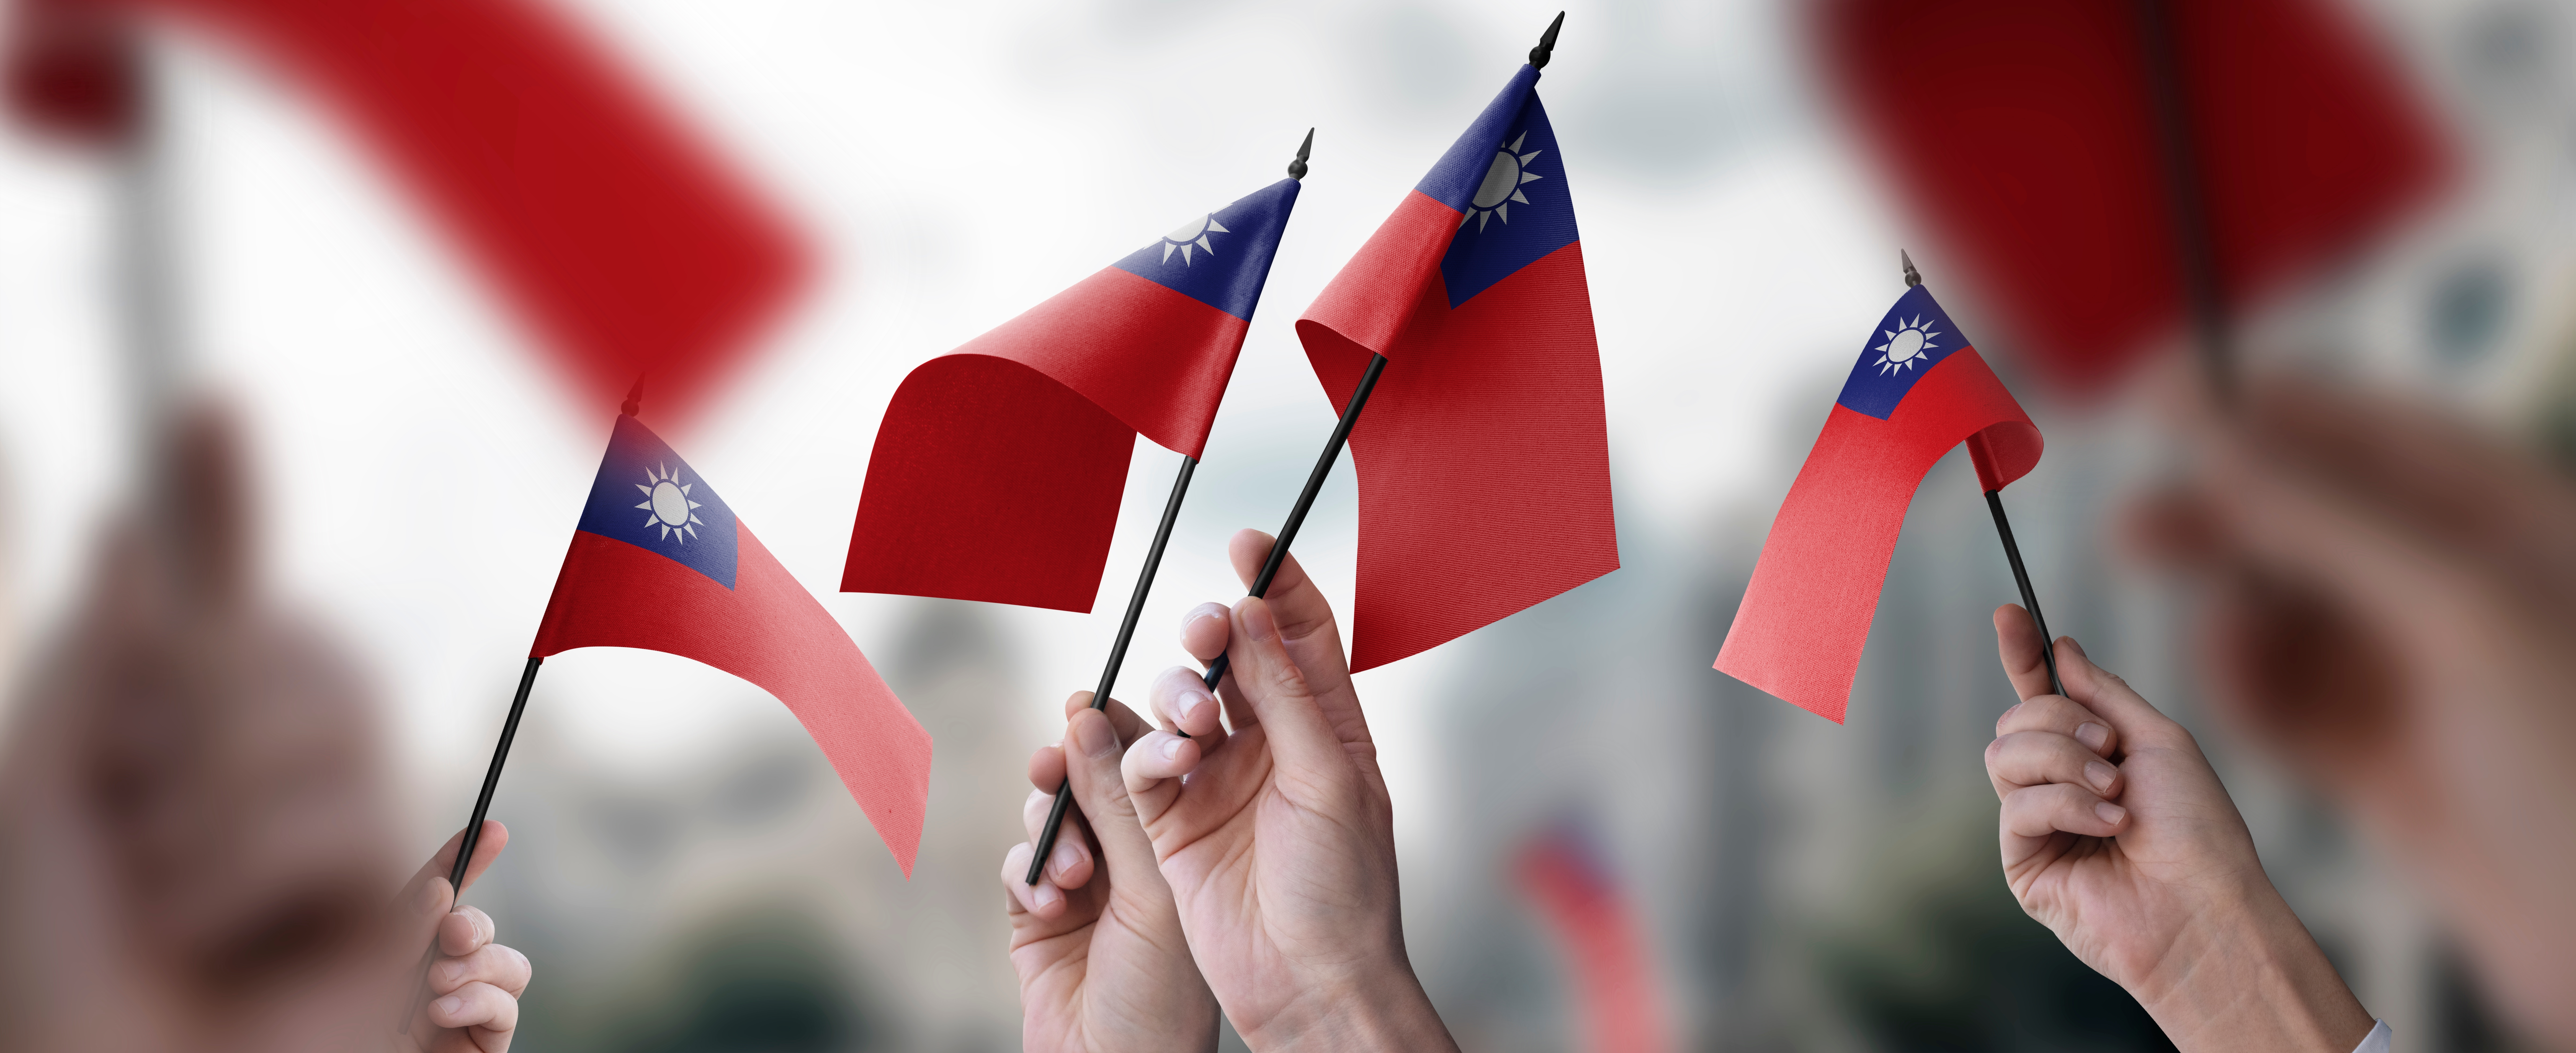 Hands holding and waving small Taiwanese flags. The flags are red with a blue canton and a white sun.